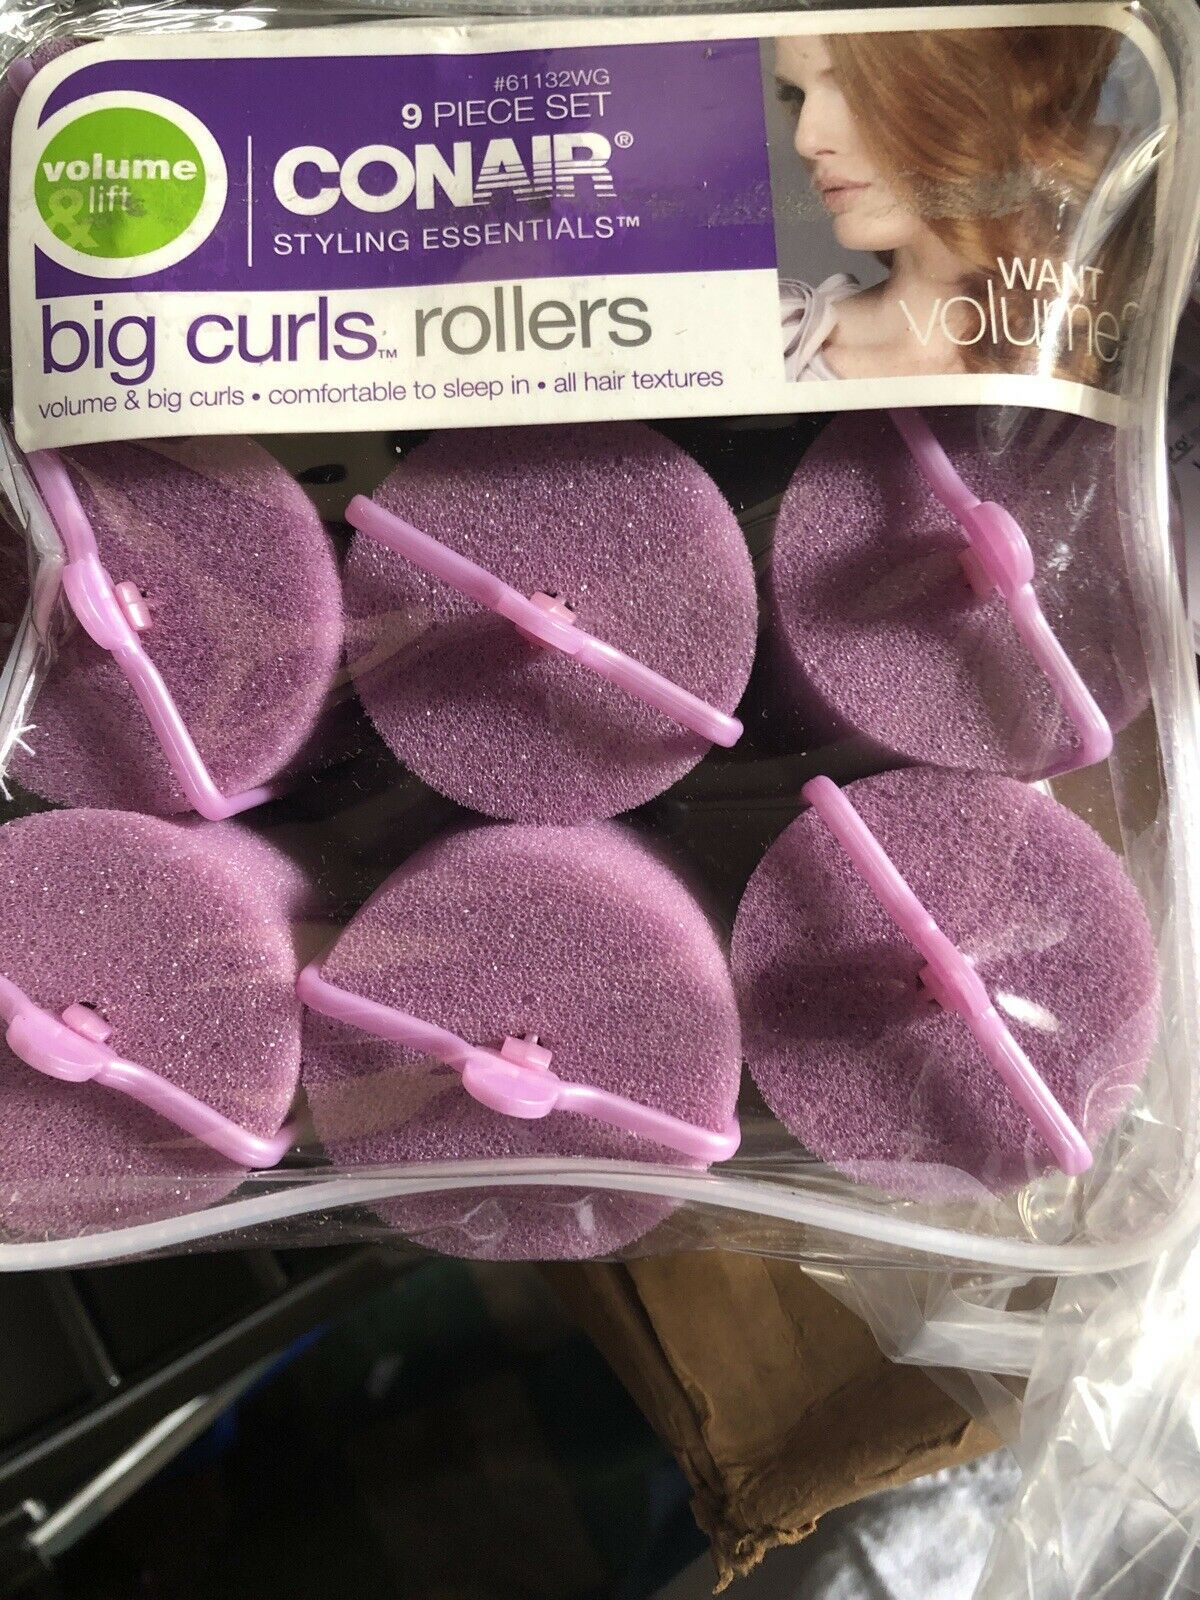 Primary image for 2 Packs Conair Big Curl Foam Rollers, 9 Count YES